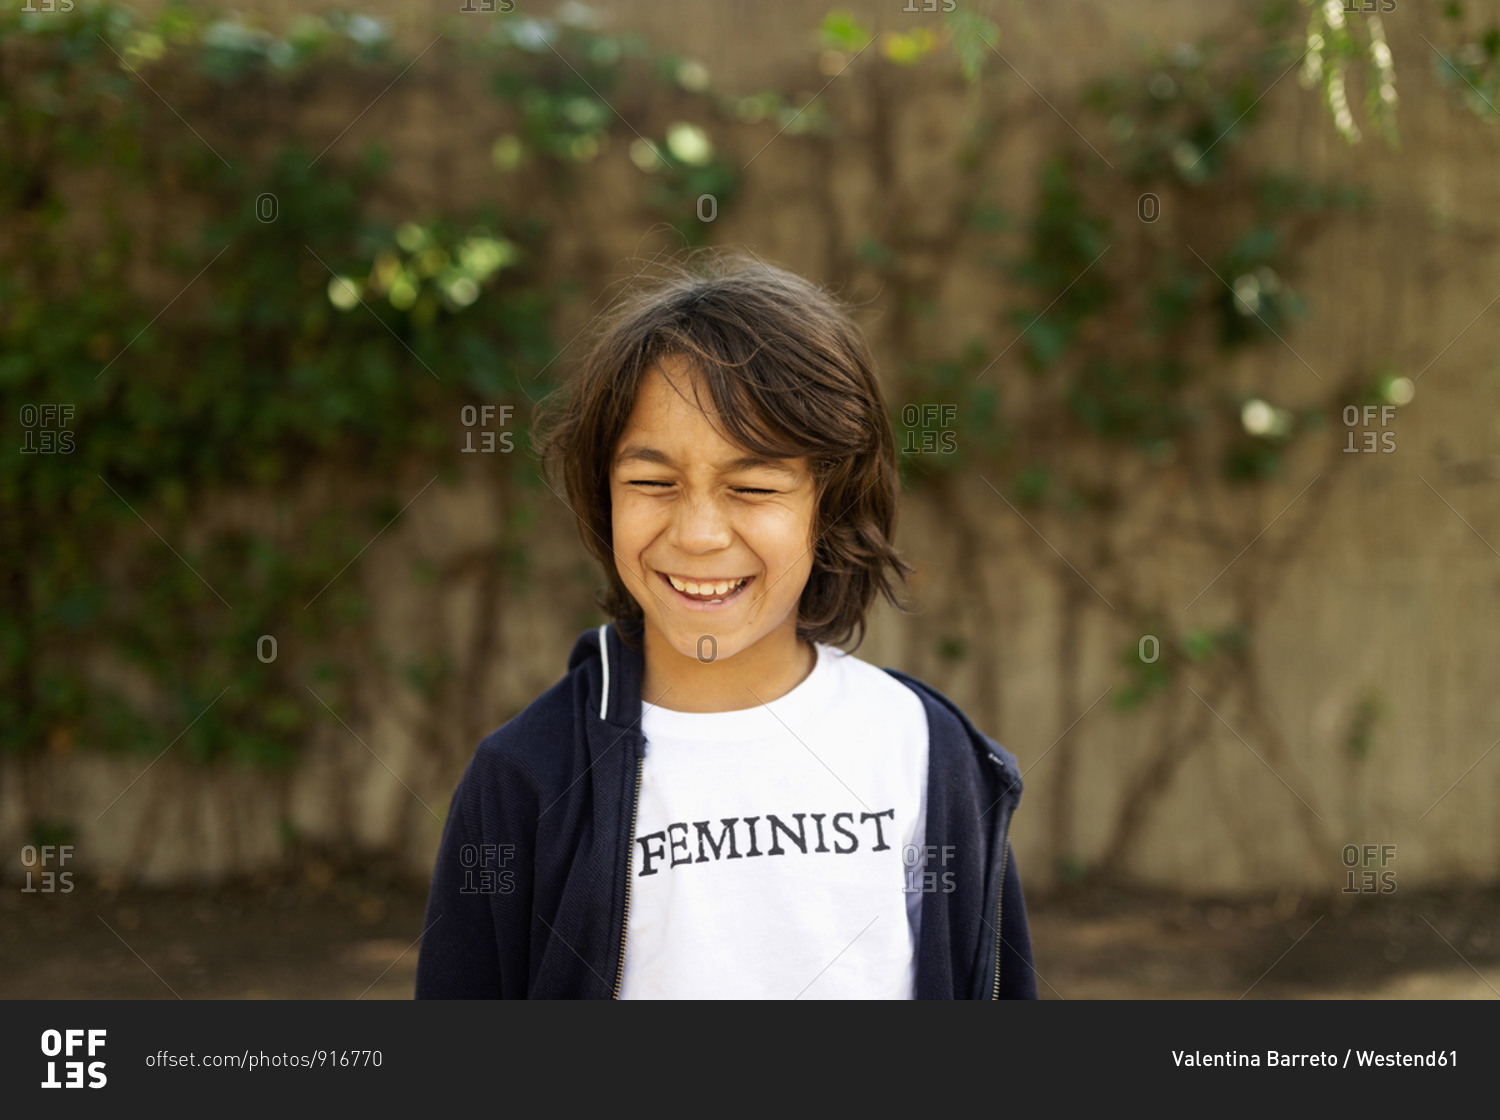 Laughing boy standing in the street with print on t-shirt- saying Feminist